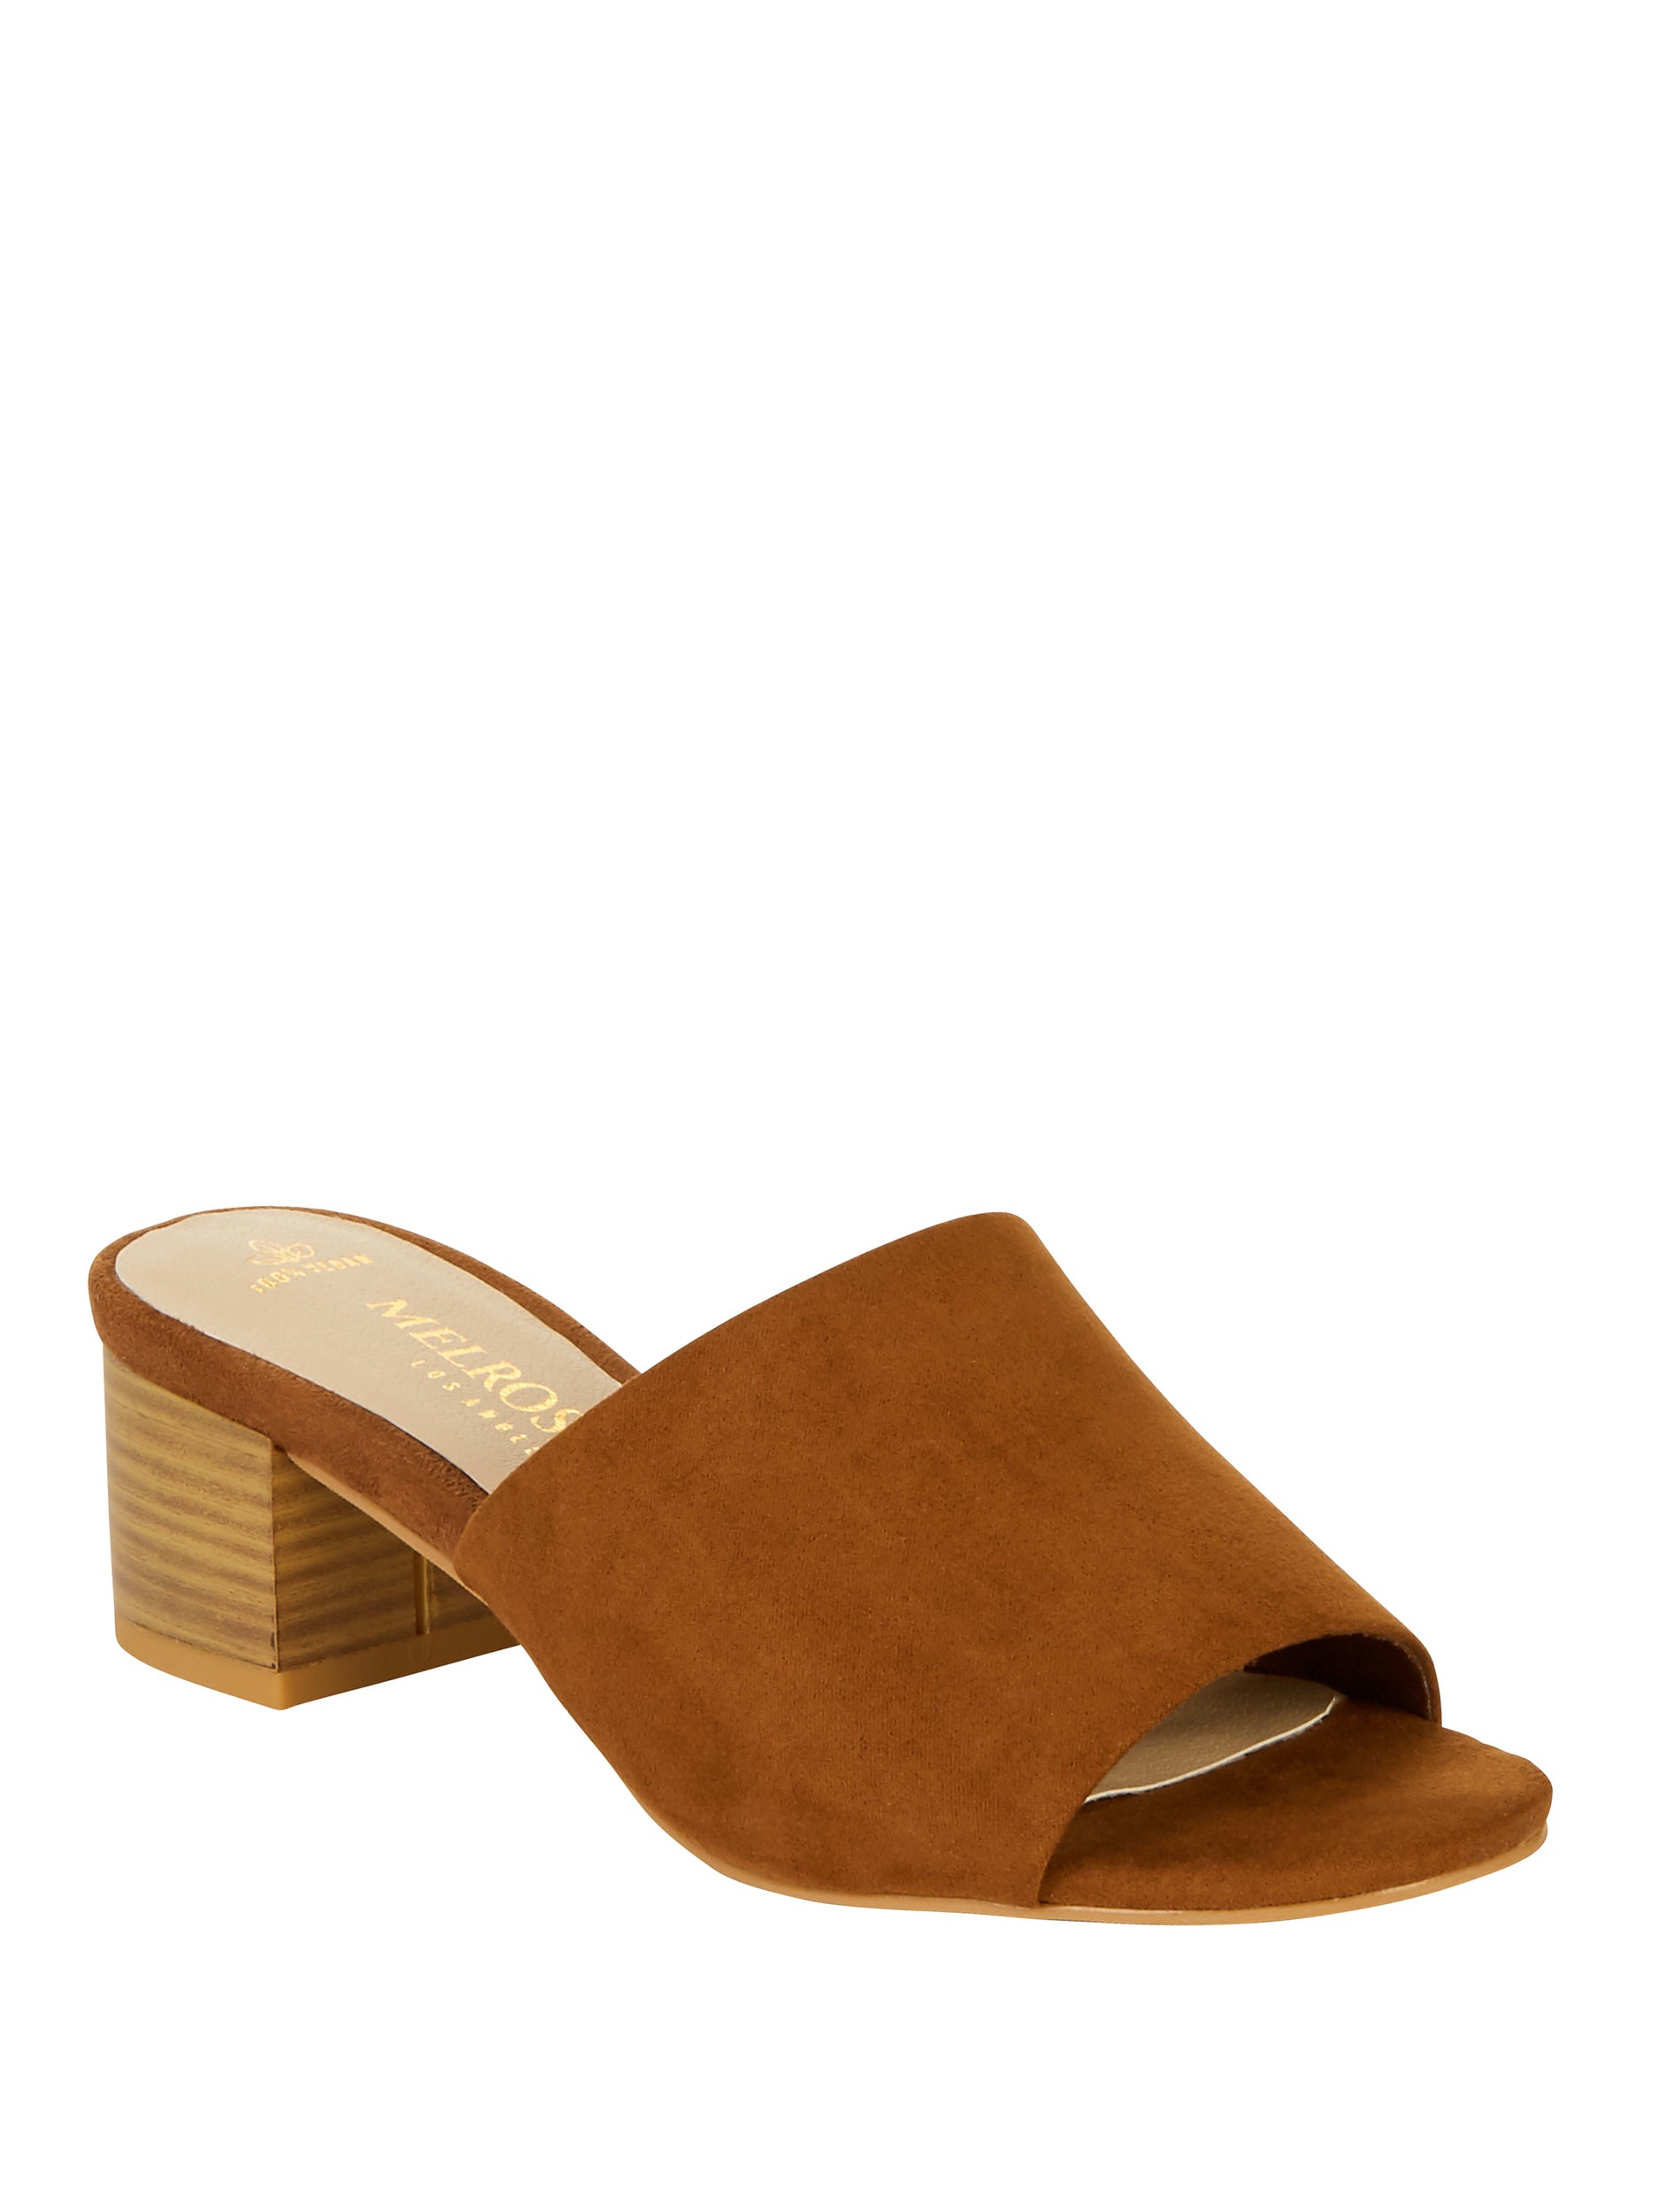 Keep It Cute and Casual In These Chic Slide-Ons